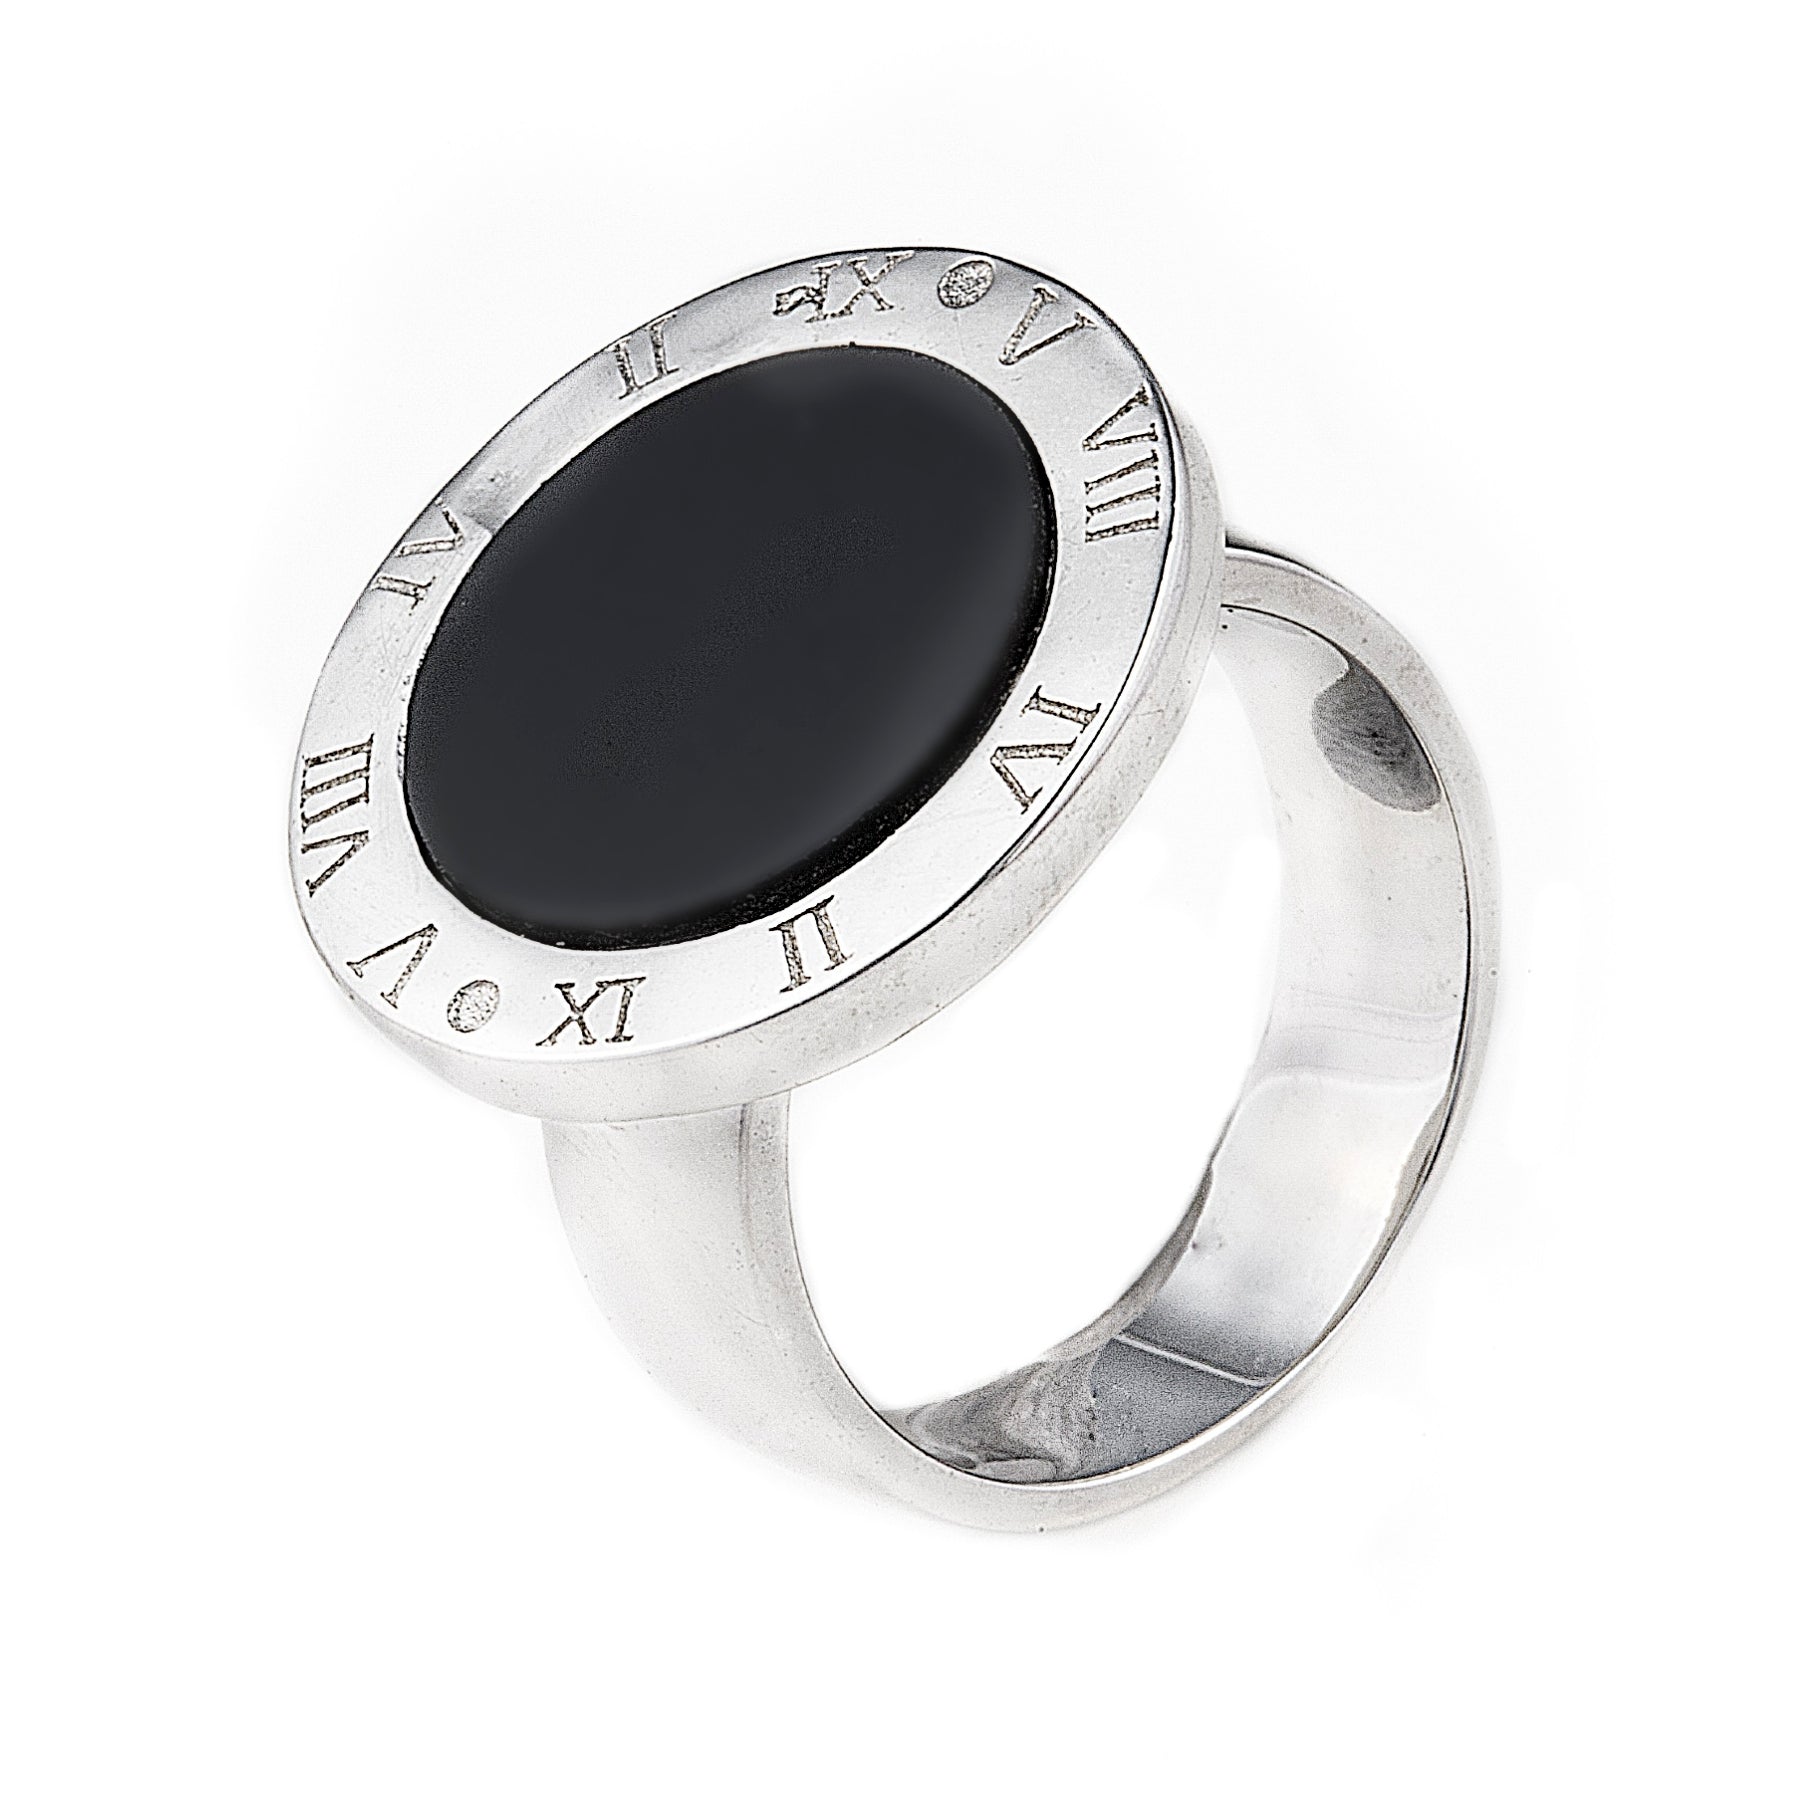 The modern Onyx World Ring is made of 925 sterling silver and features a polished black onyx centrepiece surrounded by our signature Roman Numerals. Shop rings & affordable luxury jewellery by Bellagio & Co. Worldwide shipping